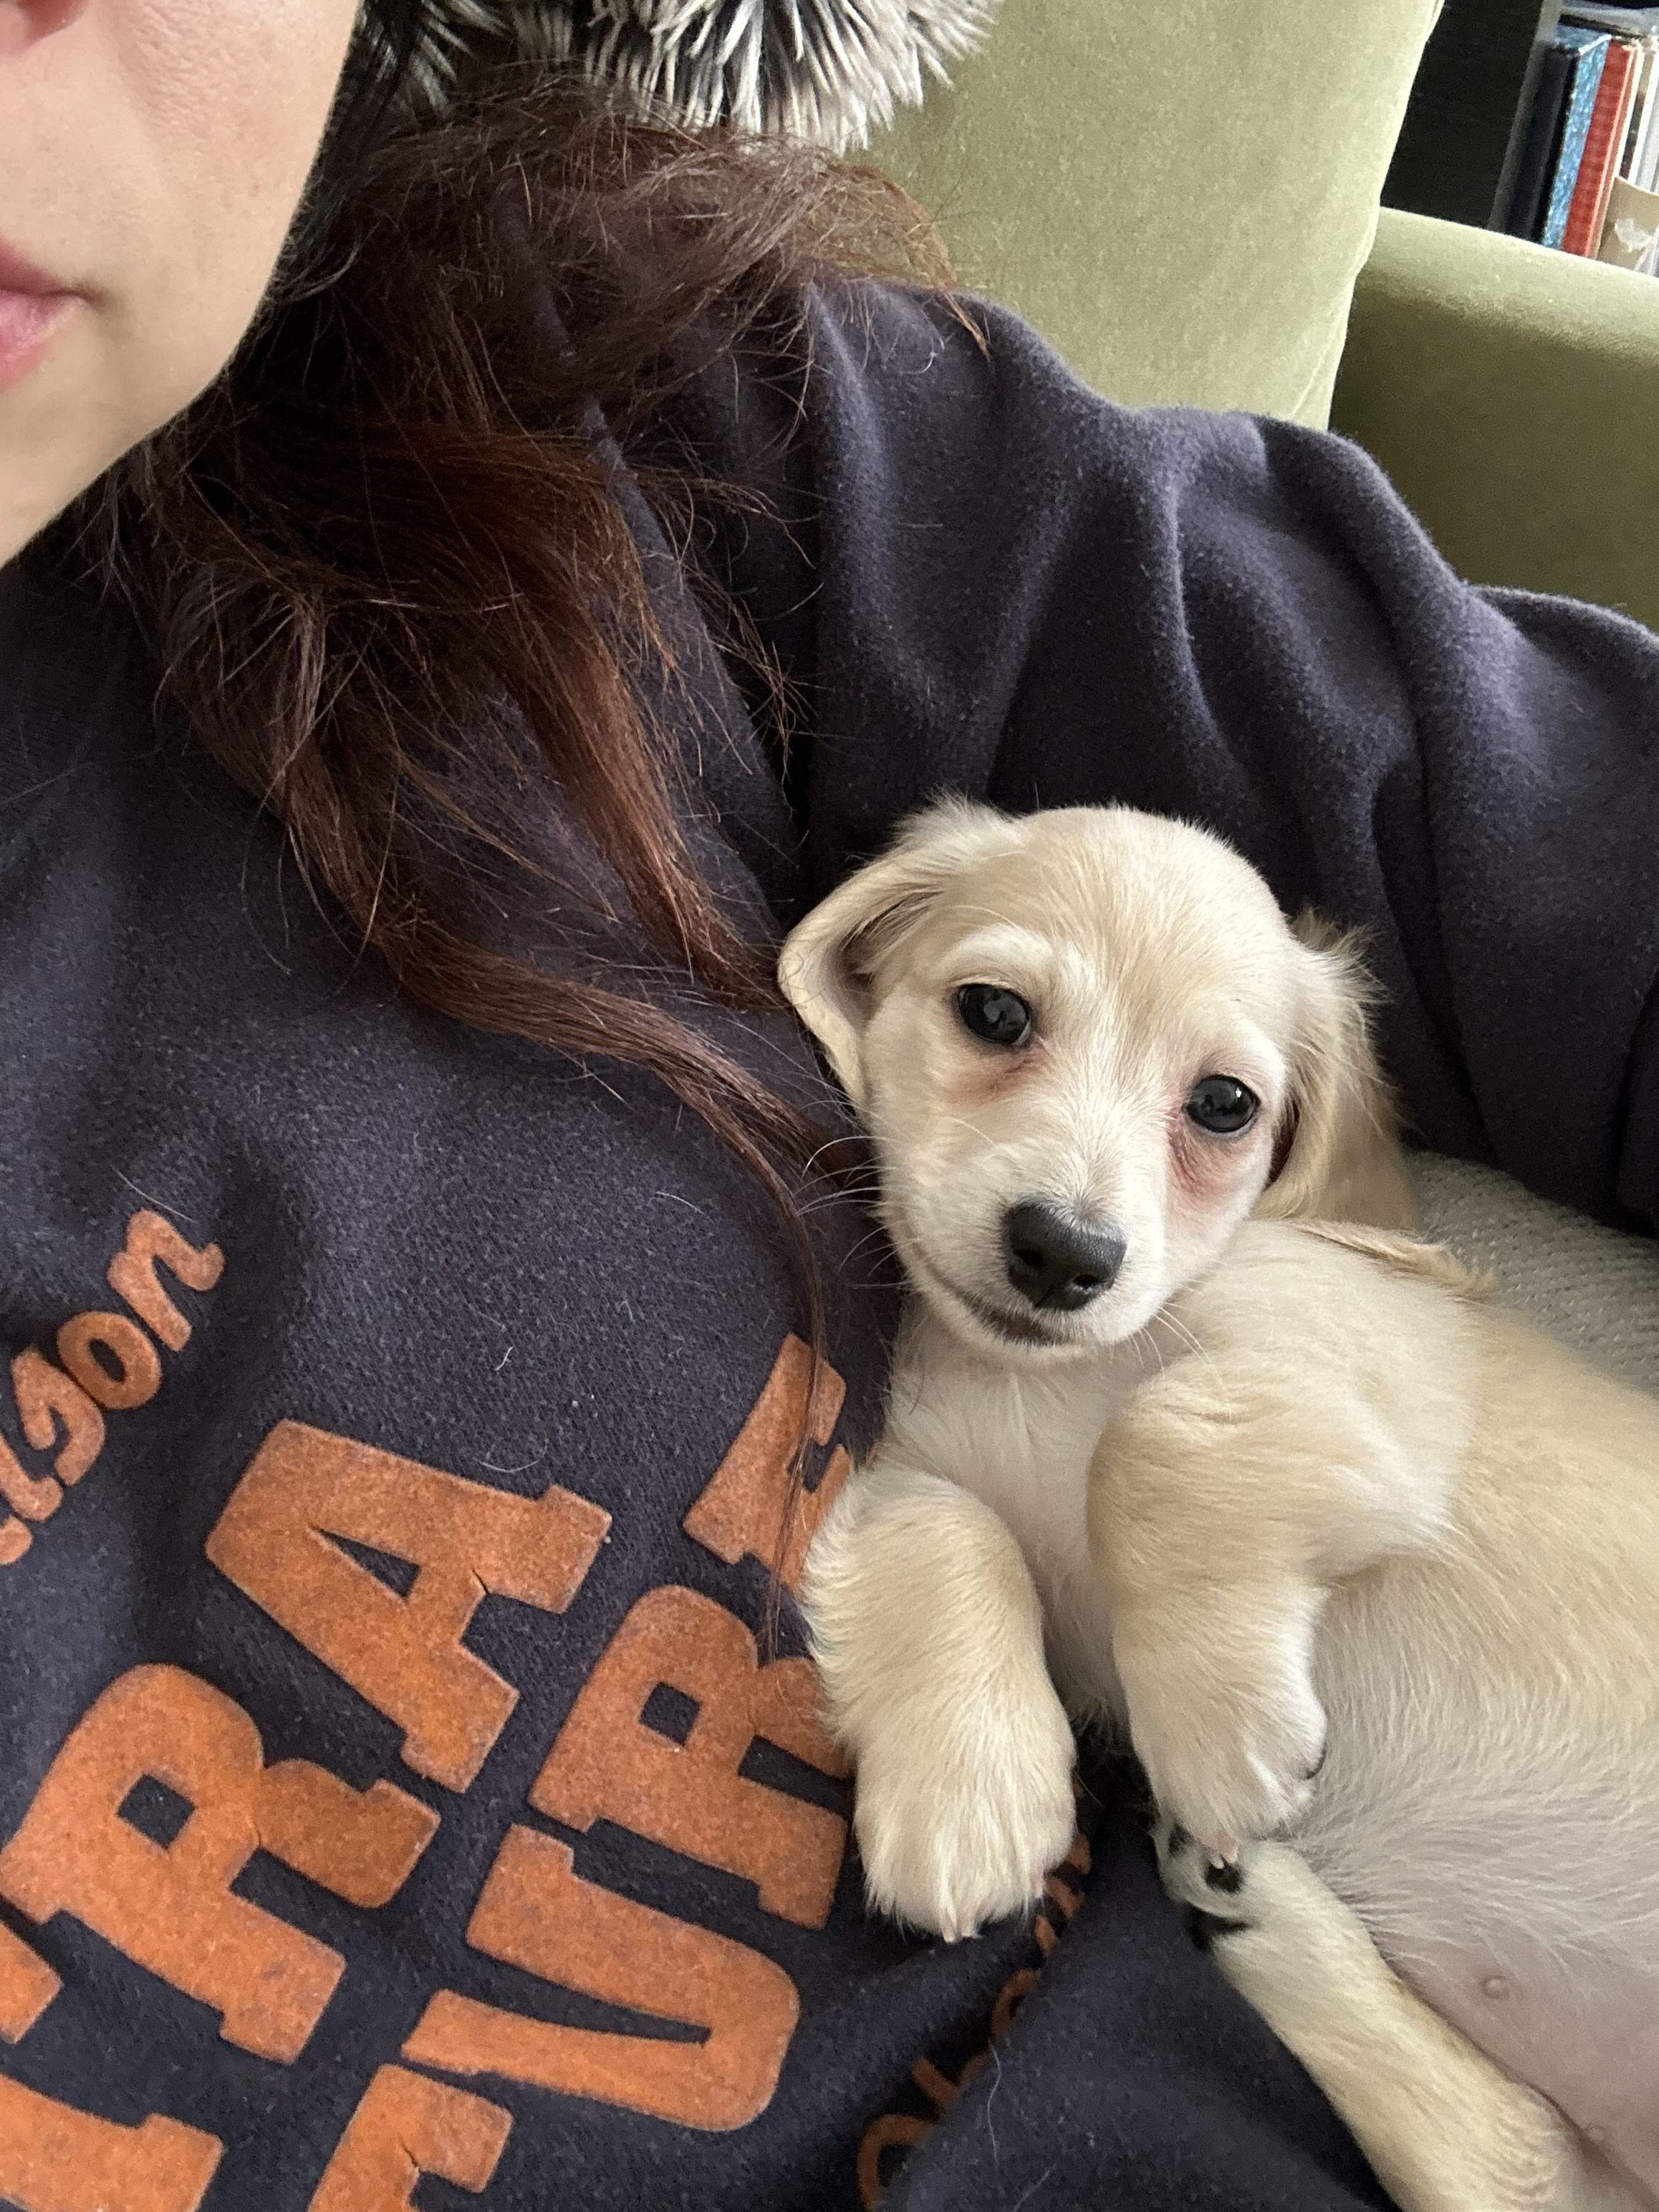 A small beige puppy rests comfortably against a person wearing a dark &quot;Extra Mural&quot; sweatshirt, with the puppy's big eyes and floppy ears prominently visible.